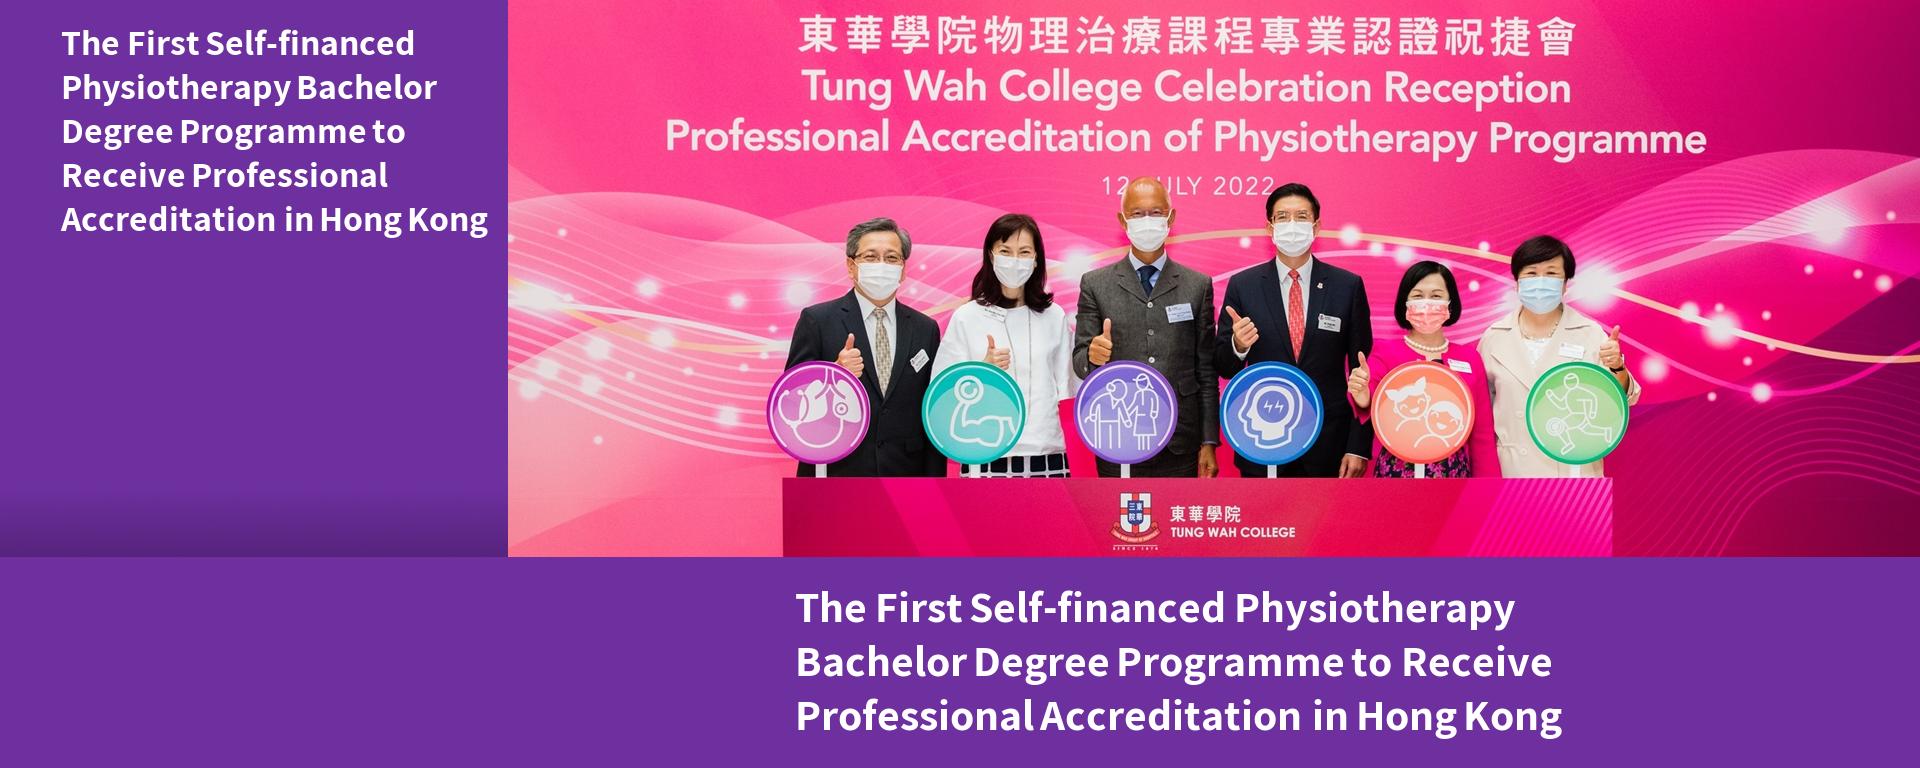 The First Self-financed Physiotherapy Bachelor Degree Programme to Receive Professional Accreditation in Hong Kong